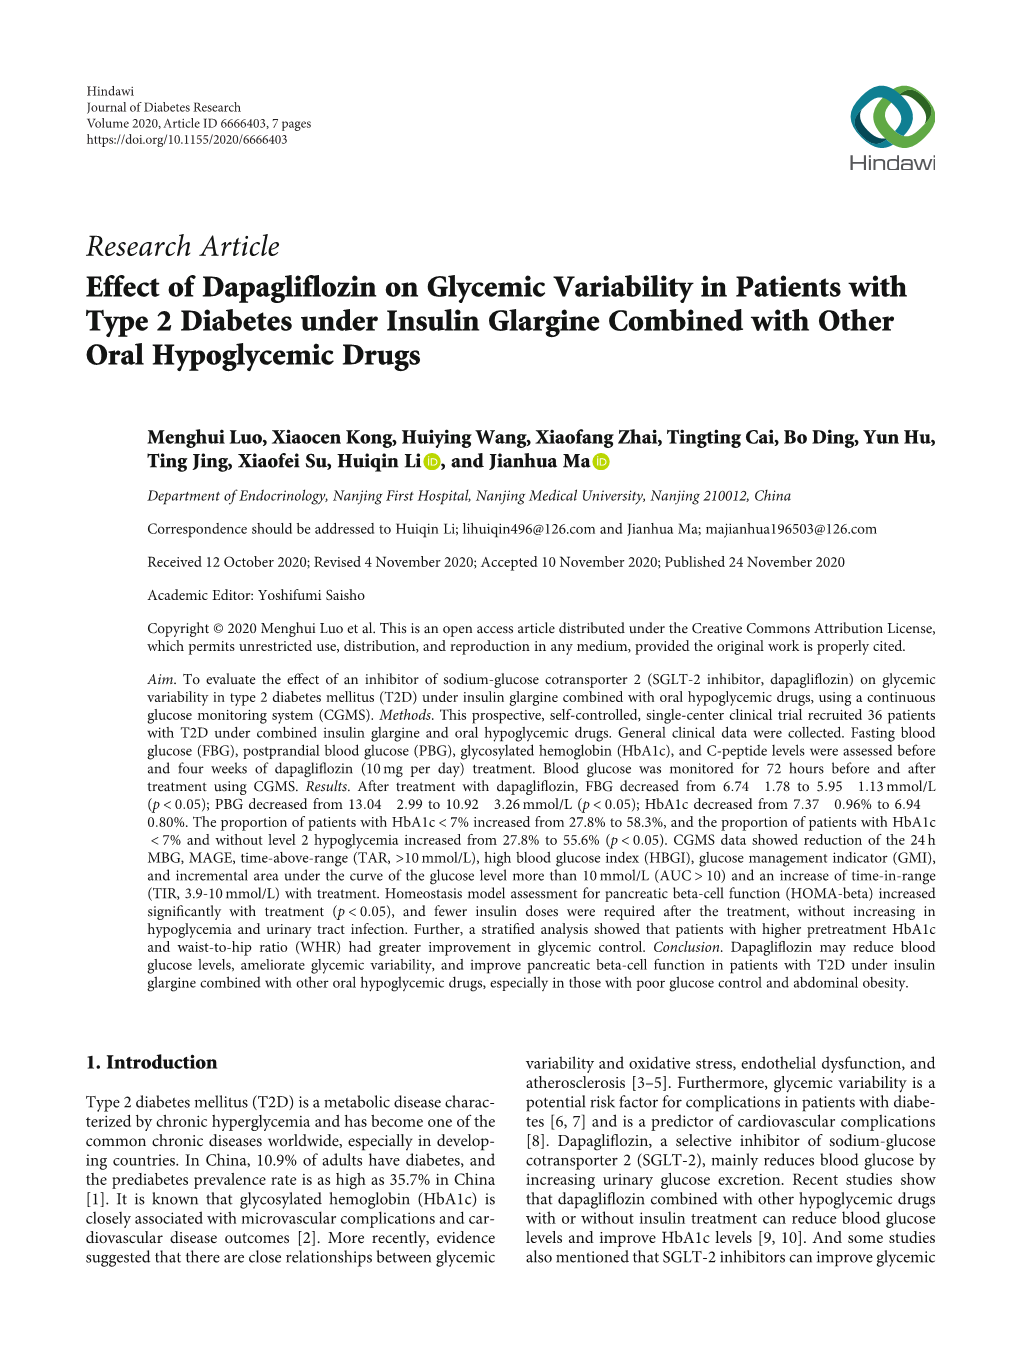 Effect of Dapagliflozin on Glycemic Variability in Patients with Type 2 Diabetes Under Insulin Glargine Combined with Other Oral Hypoglycemic Drugs